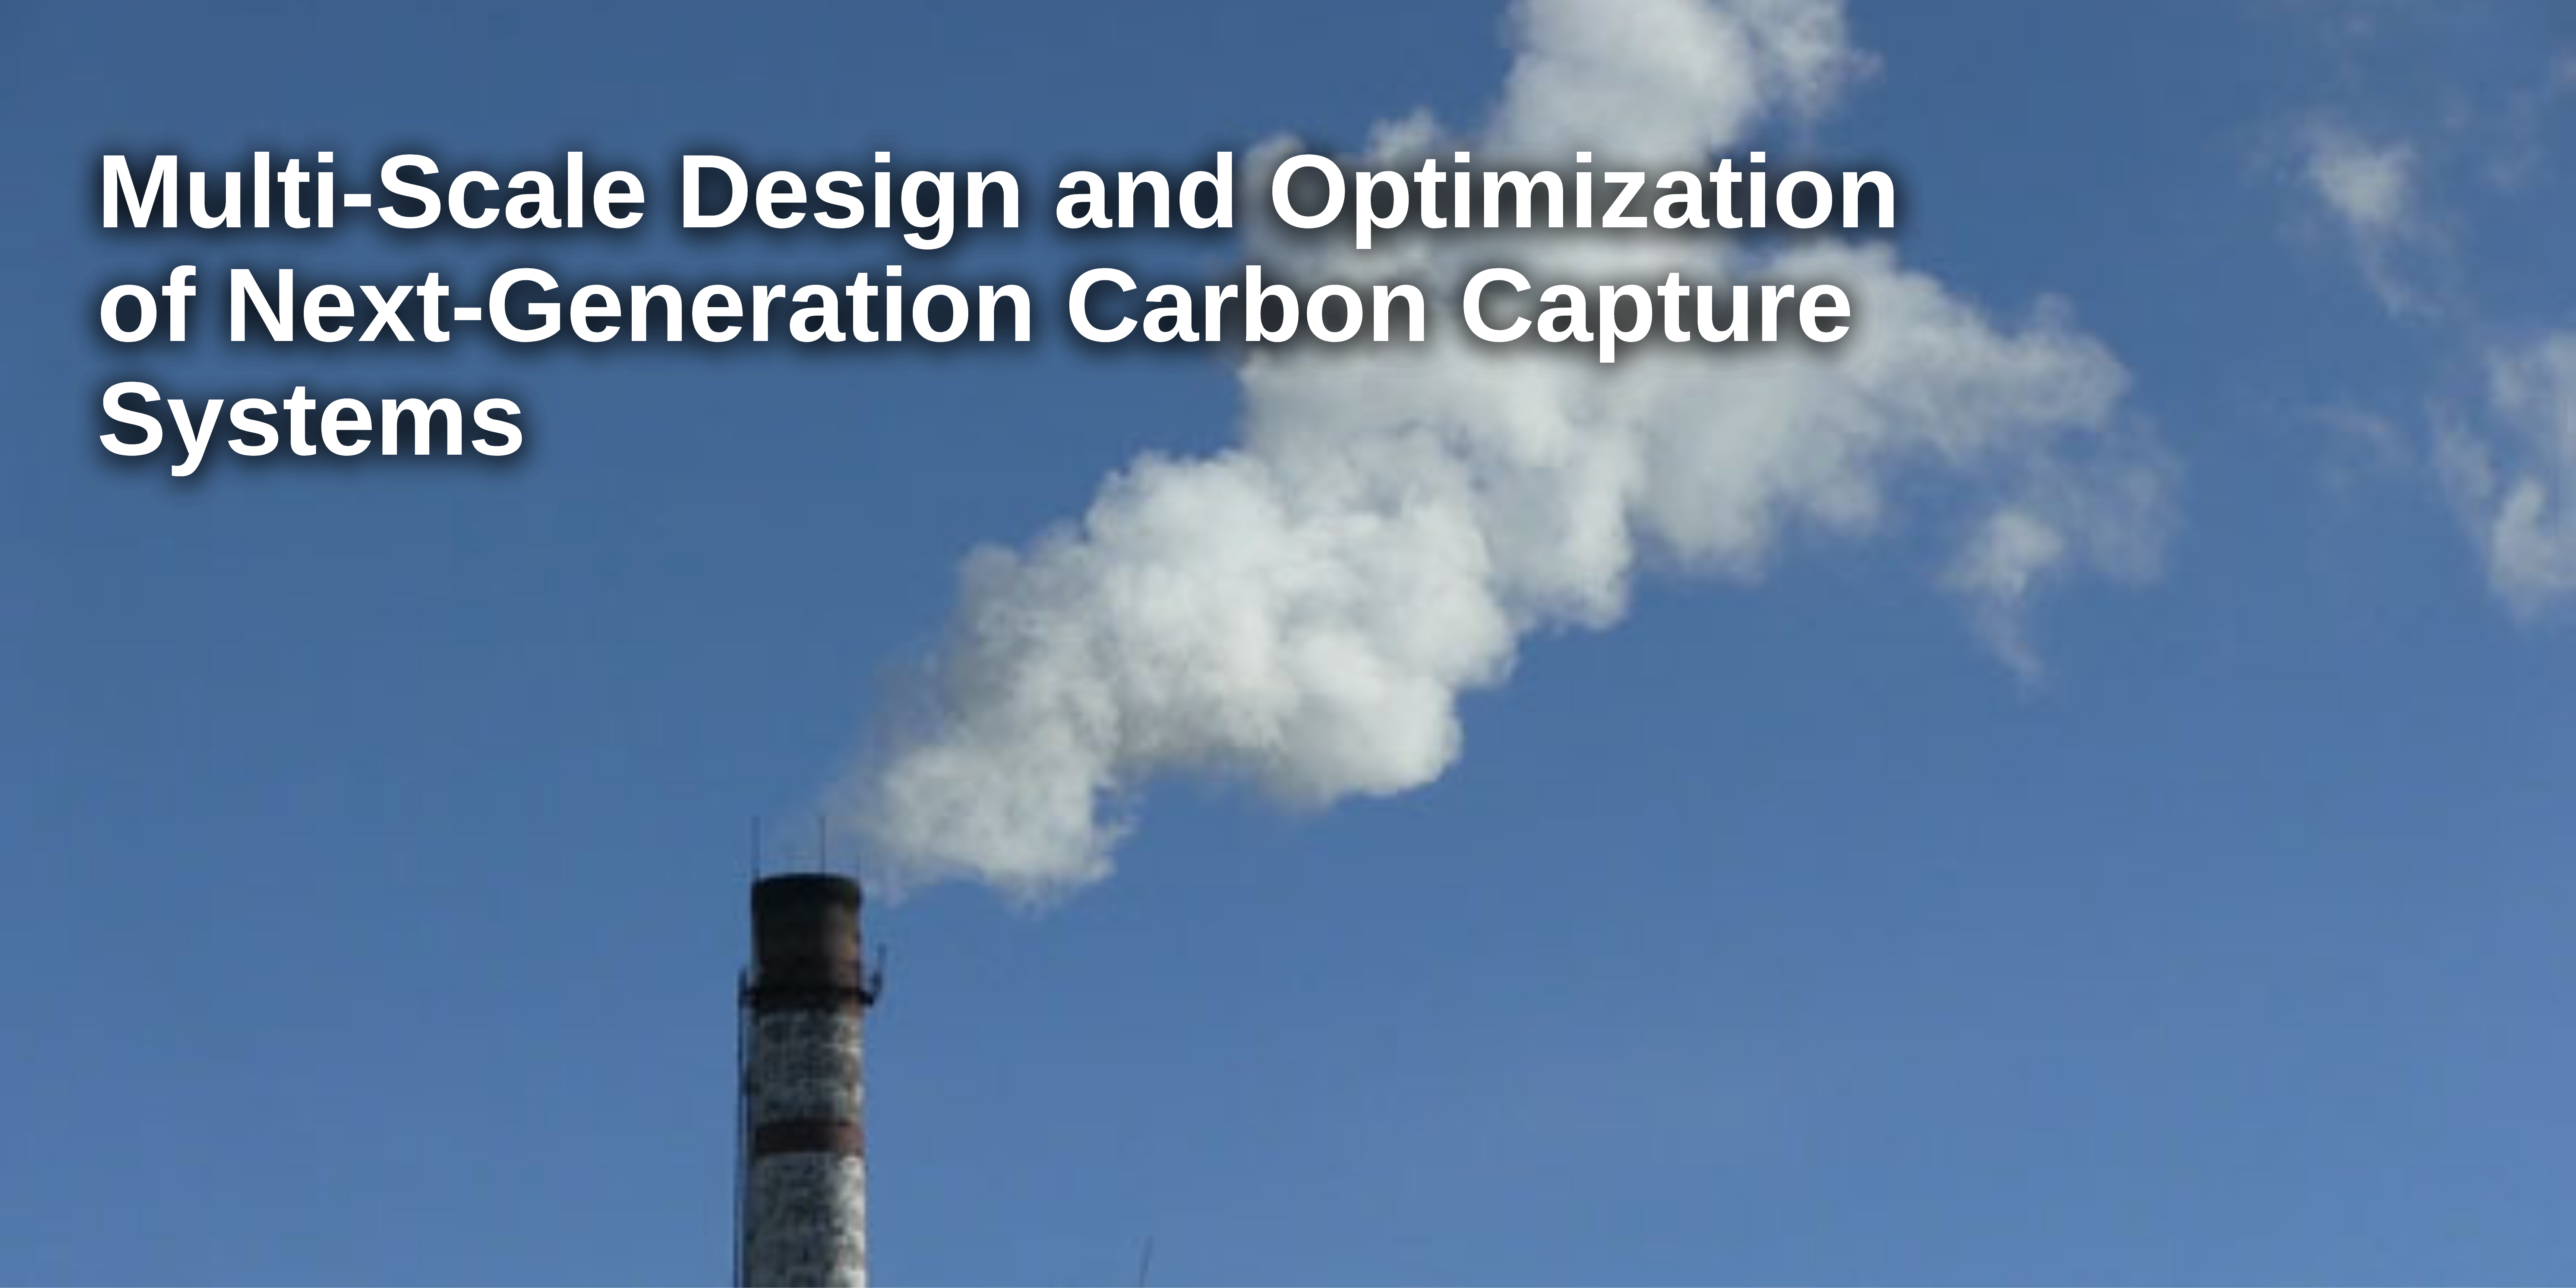 CO2 emissions from smoke stack with title: Multi-Scale Design and Optimization of Next-Generation Carbon Capture Systems